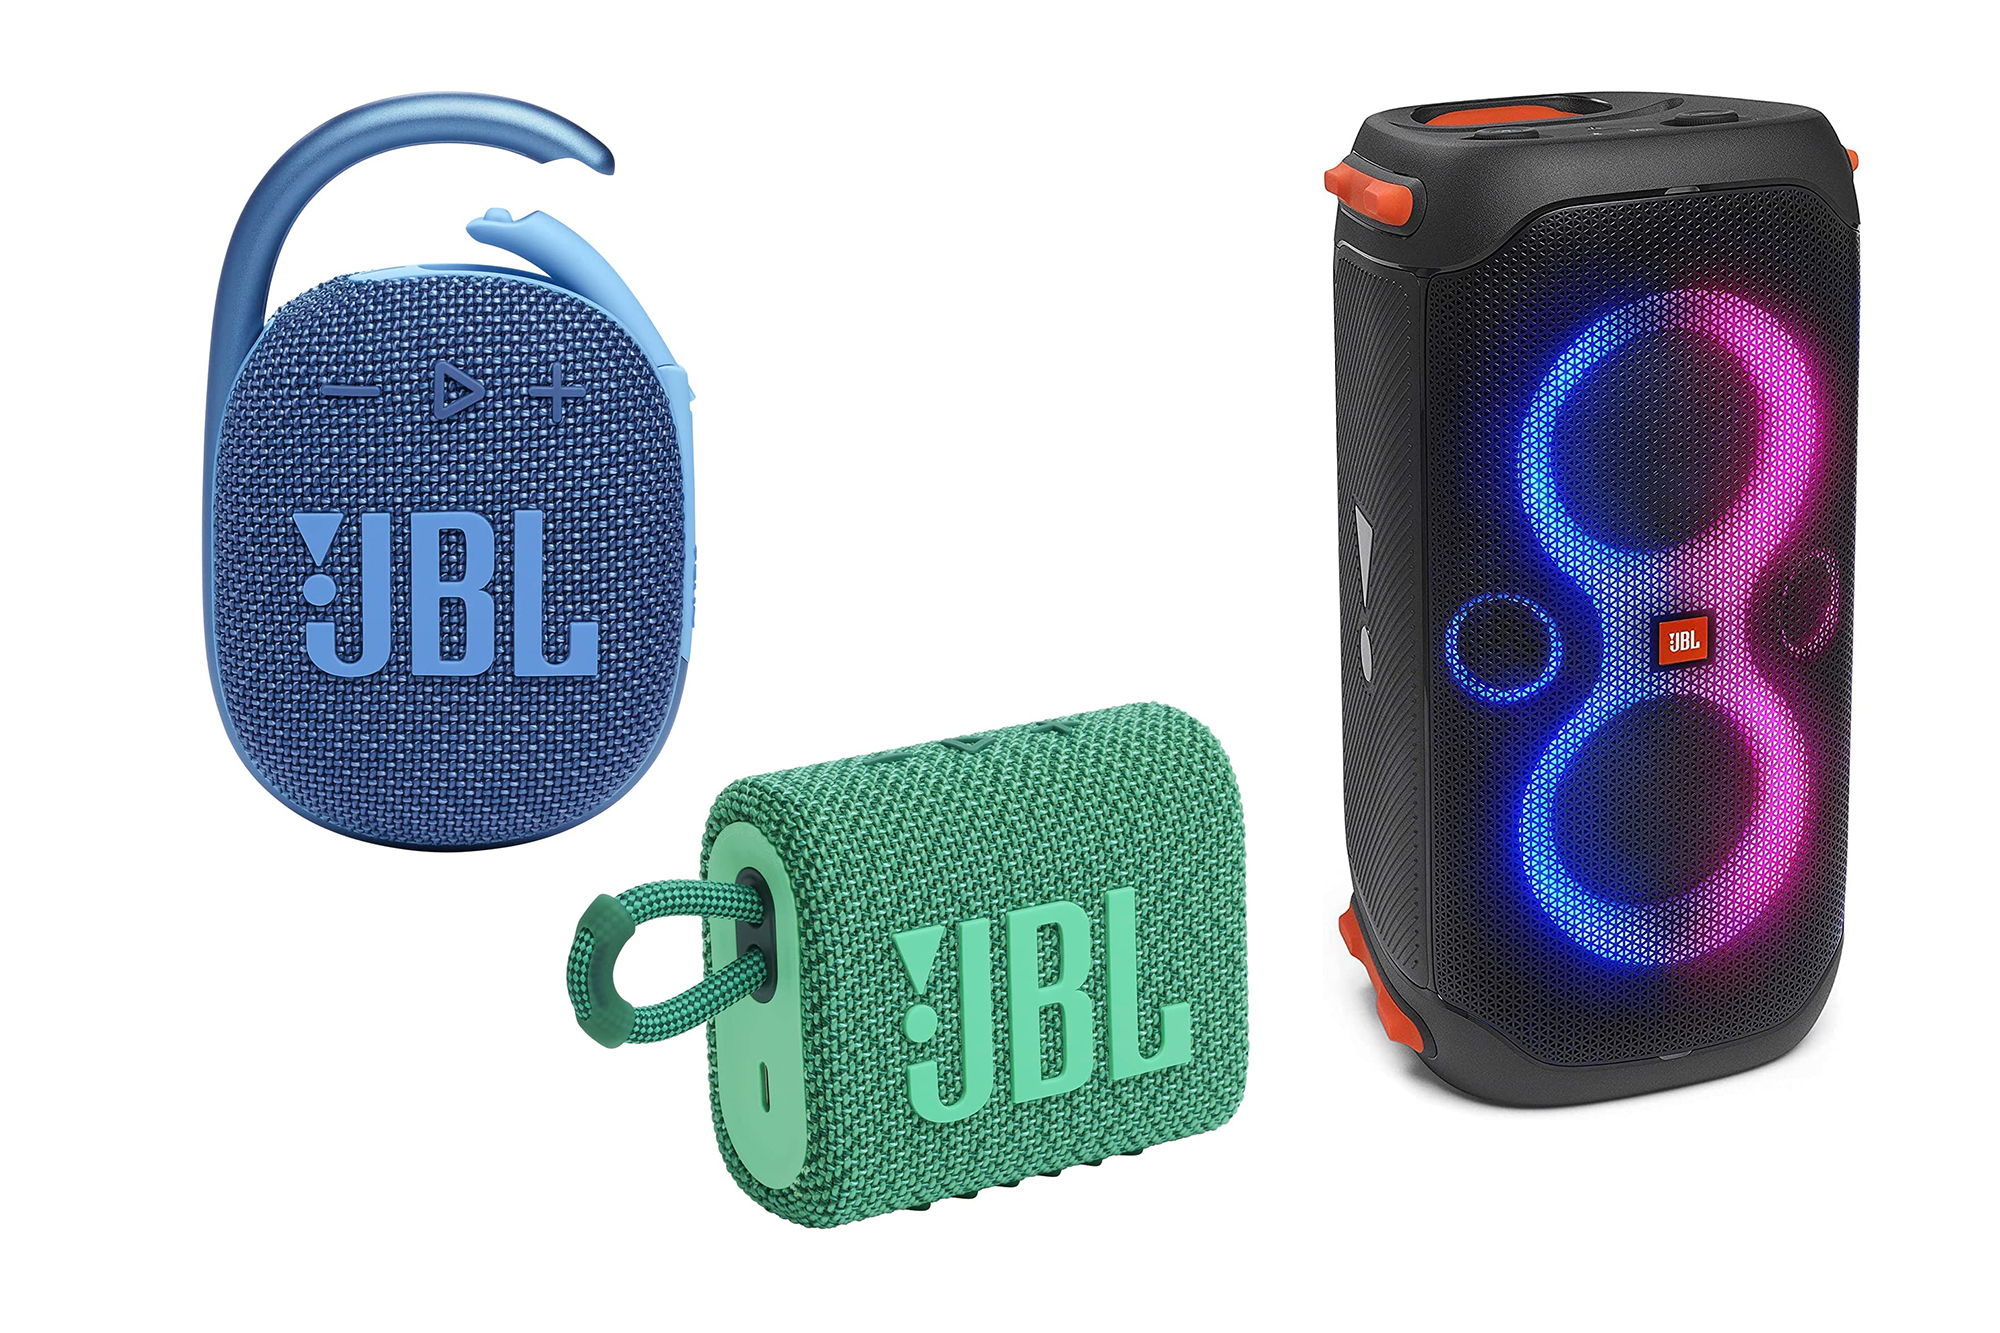 Bring all and the to Amazon Popular speaker with yard on | bops boys outdoor Science the deals